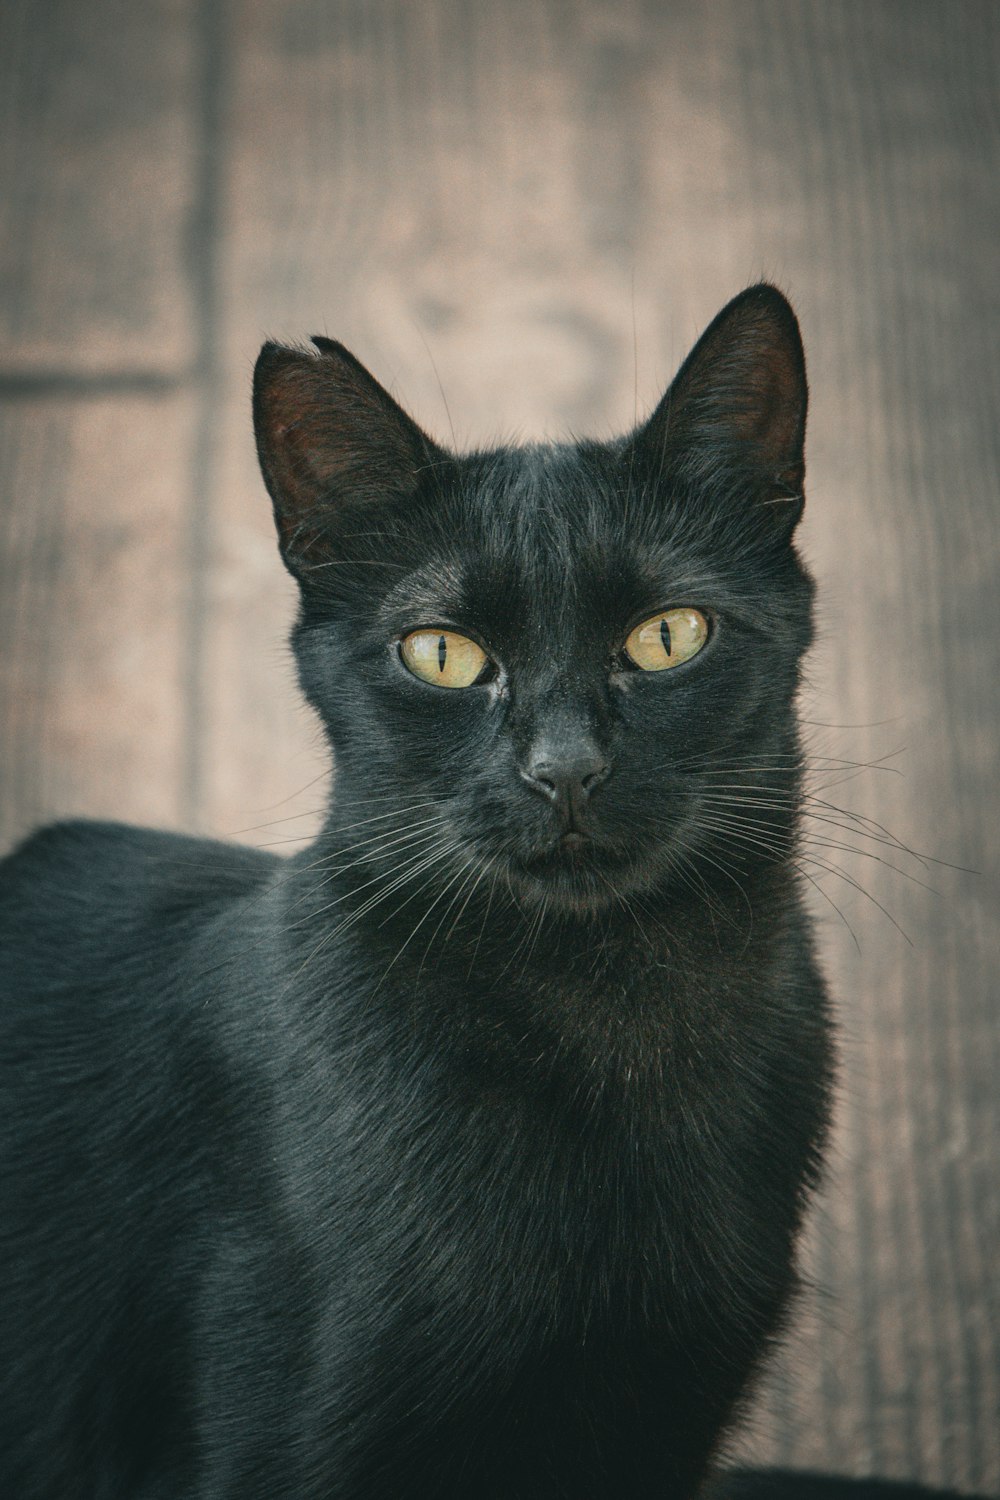 a black cat sitting on top of a wooden floor